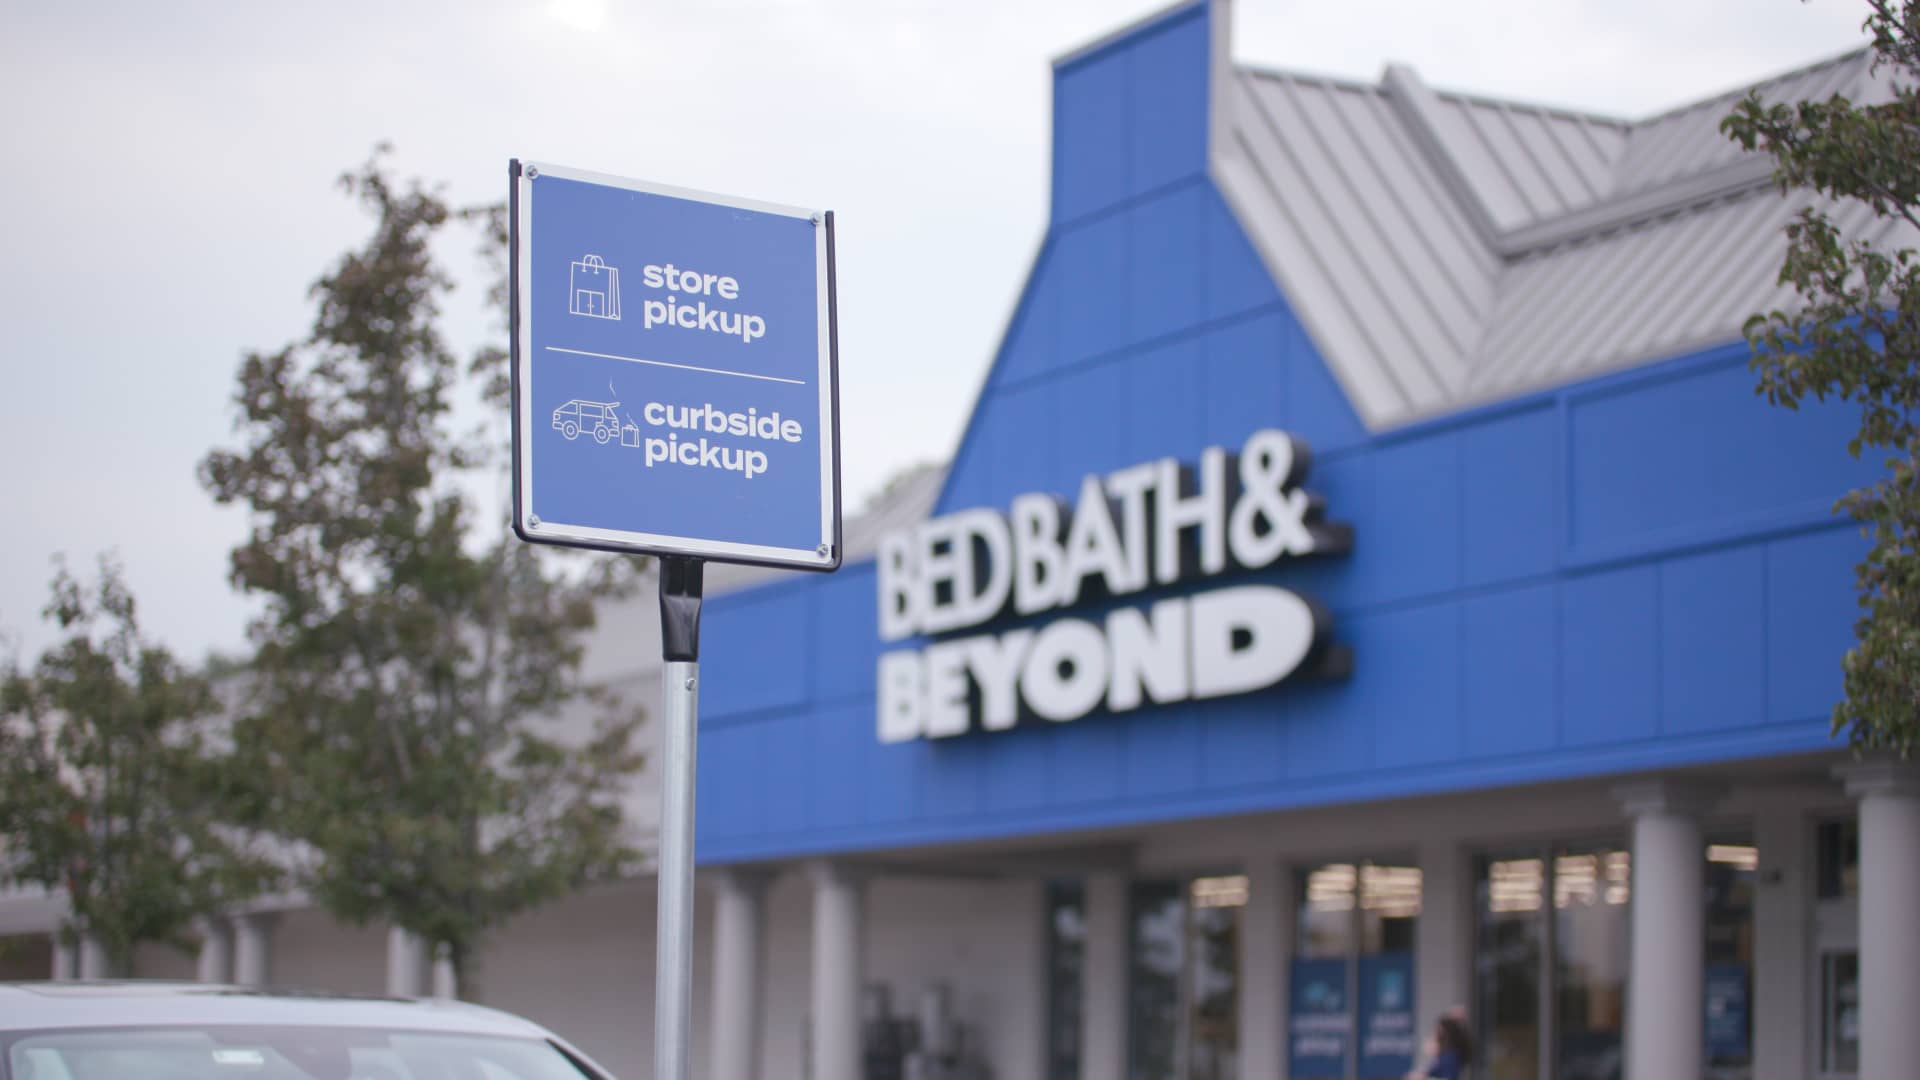 Bed Bath & Beyond (BBBY) reported revenue Q3 2020 miss